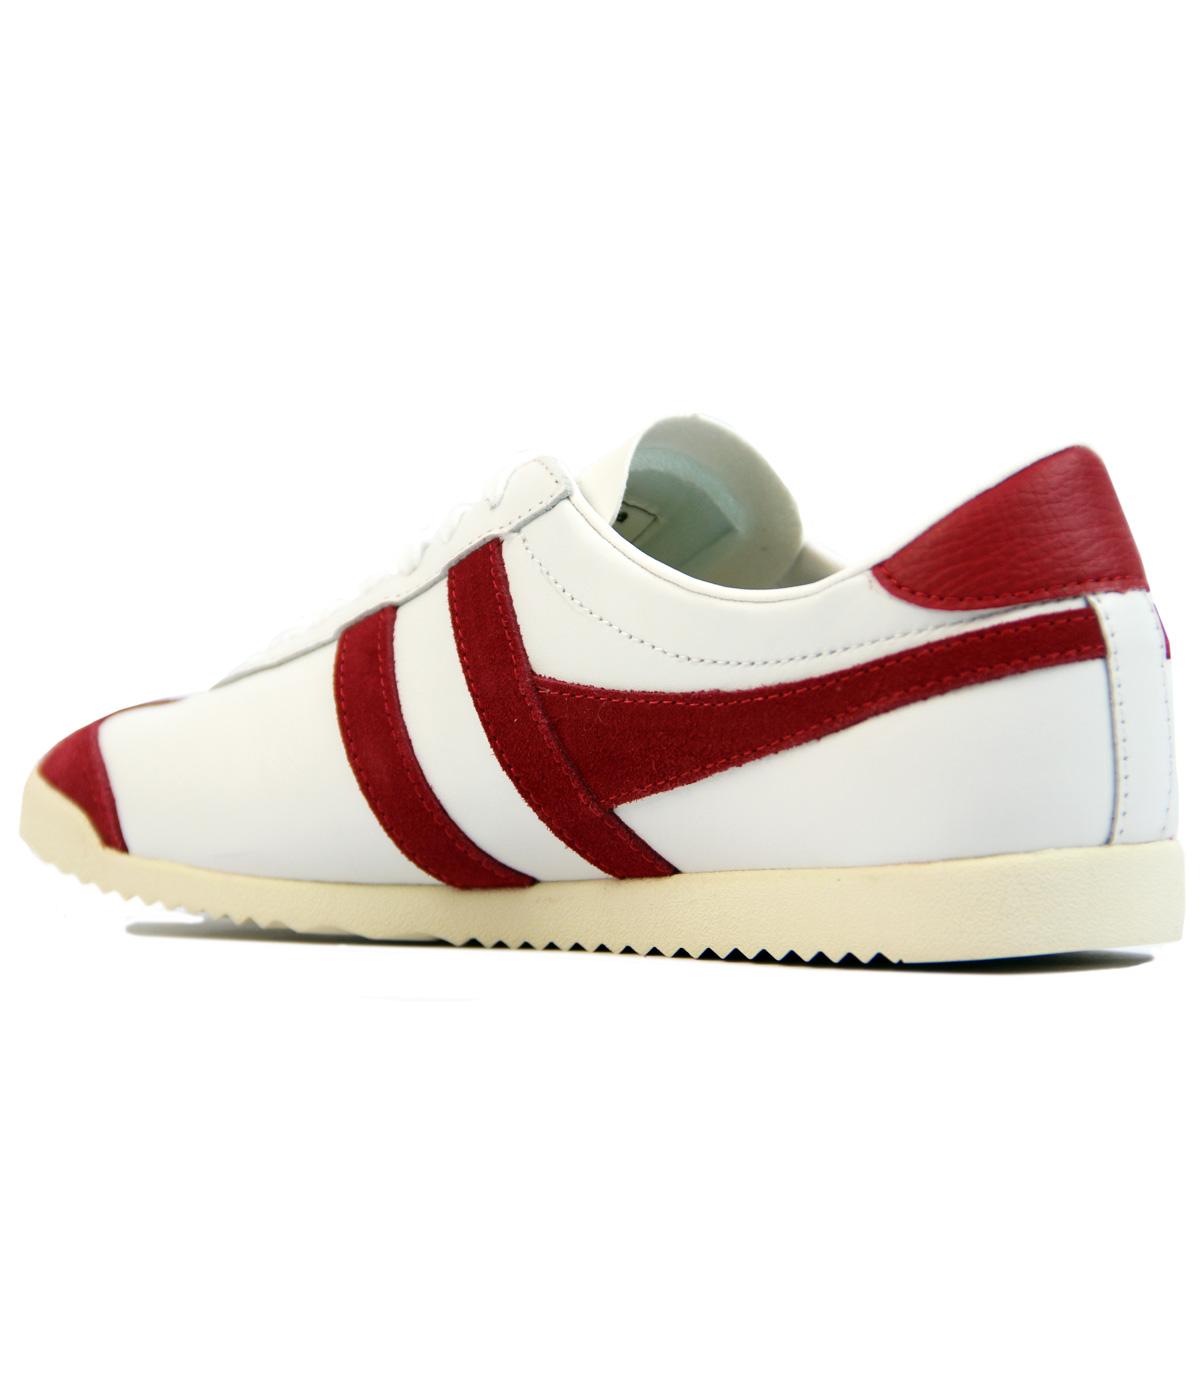 GOLA Bullet Retro Indie Leather Trainers in White/Red